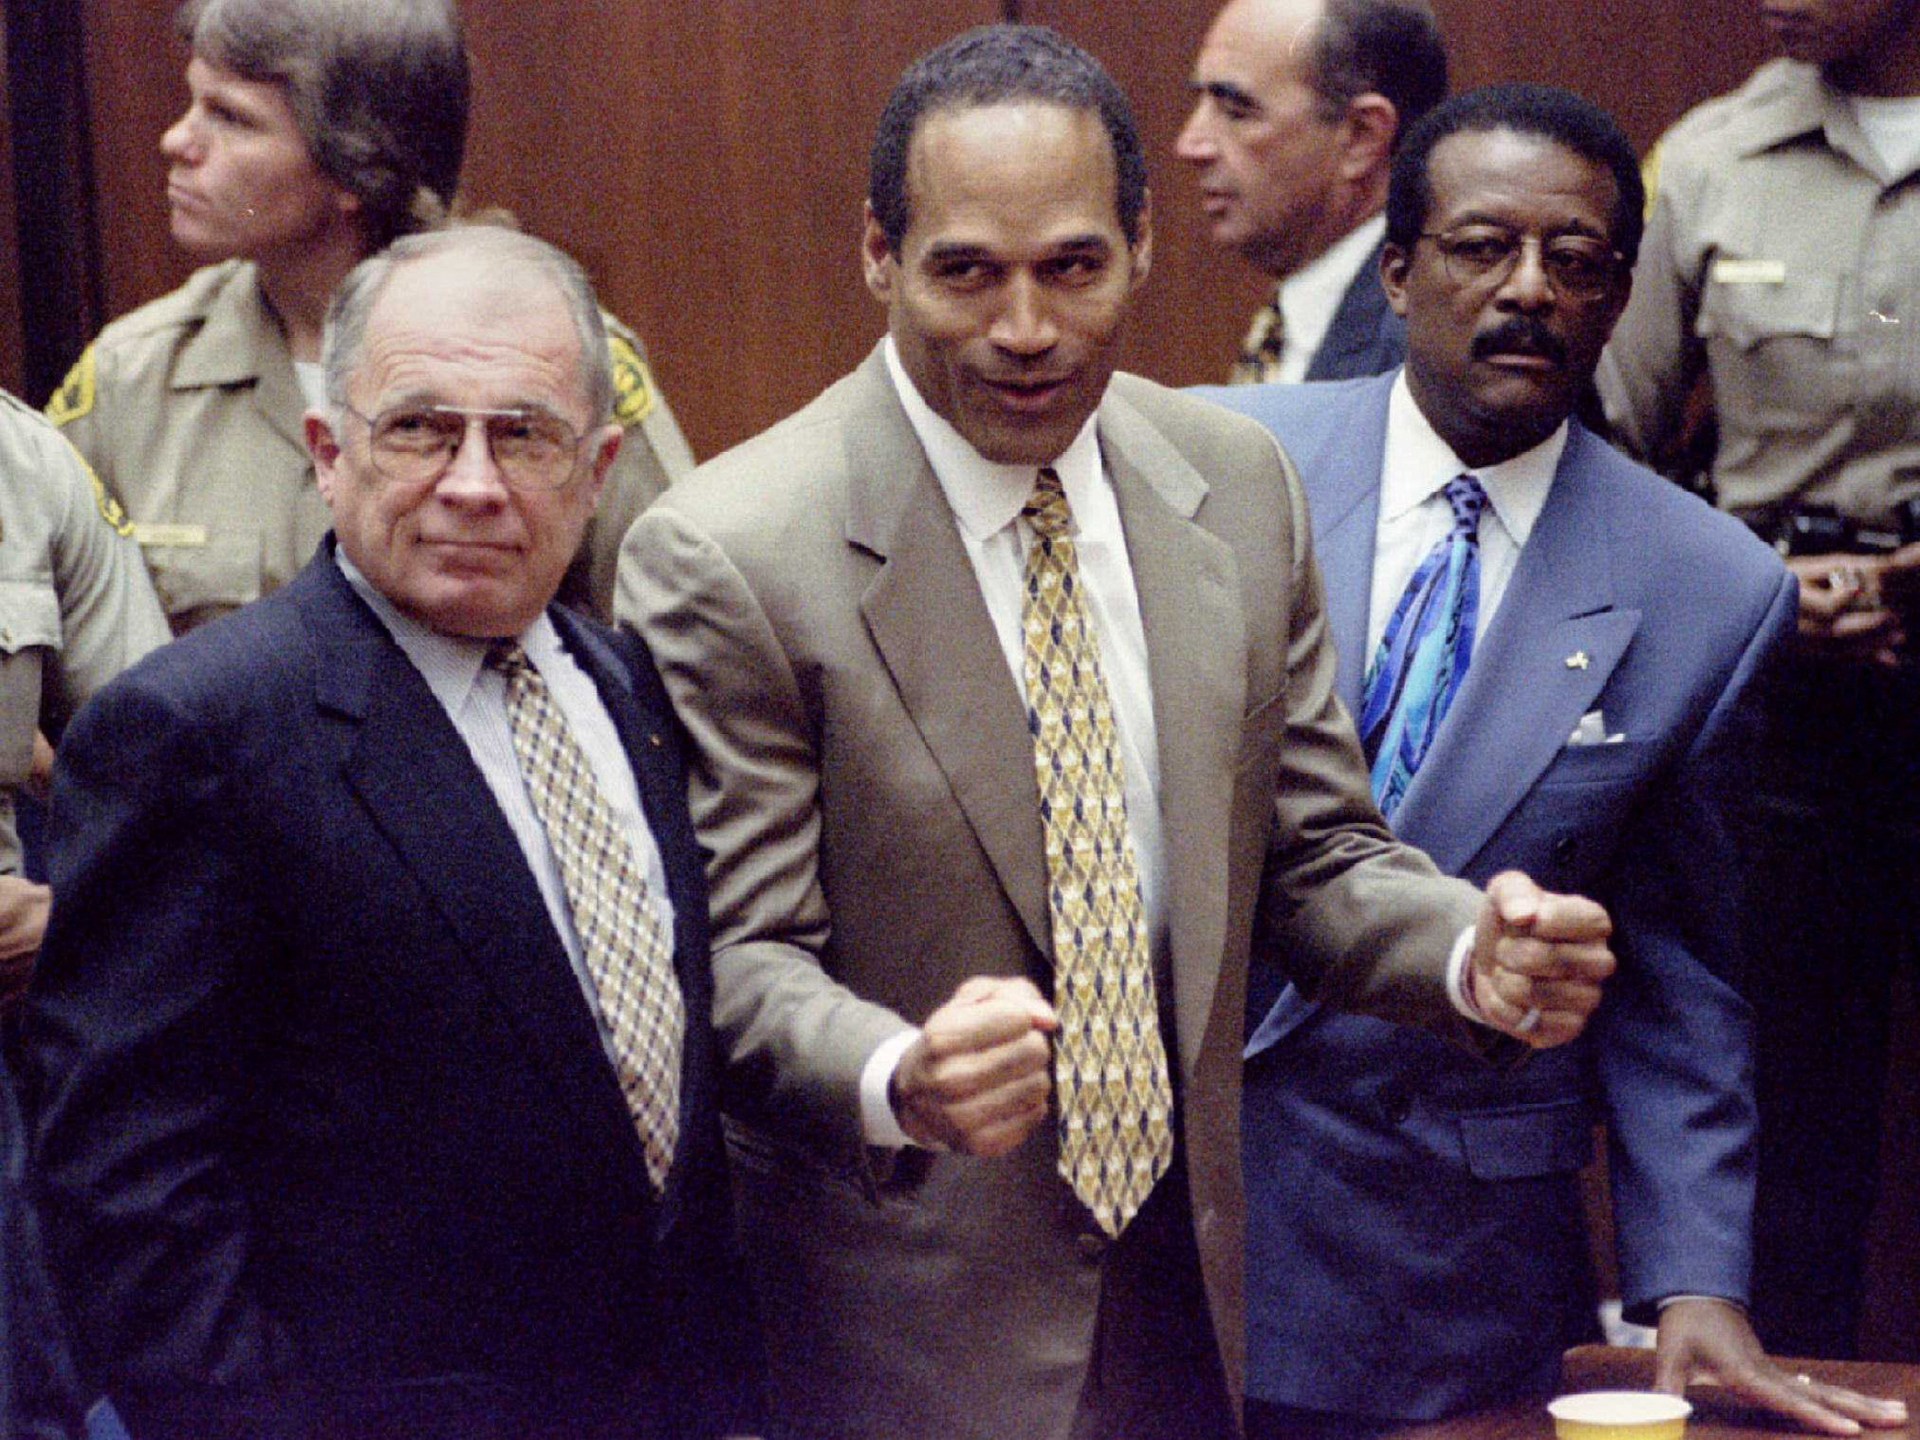 O.J. Simpson dies after battle with cancer | Crime